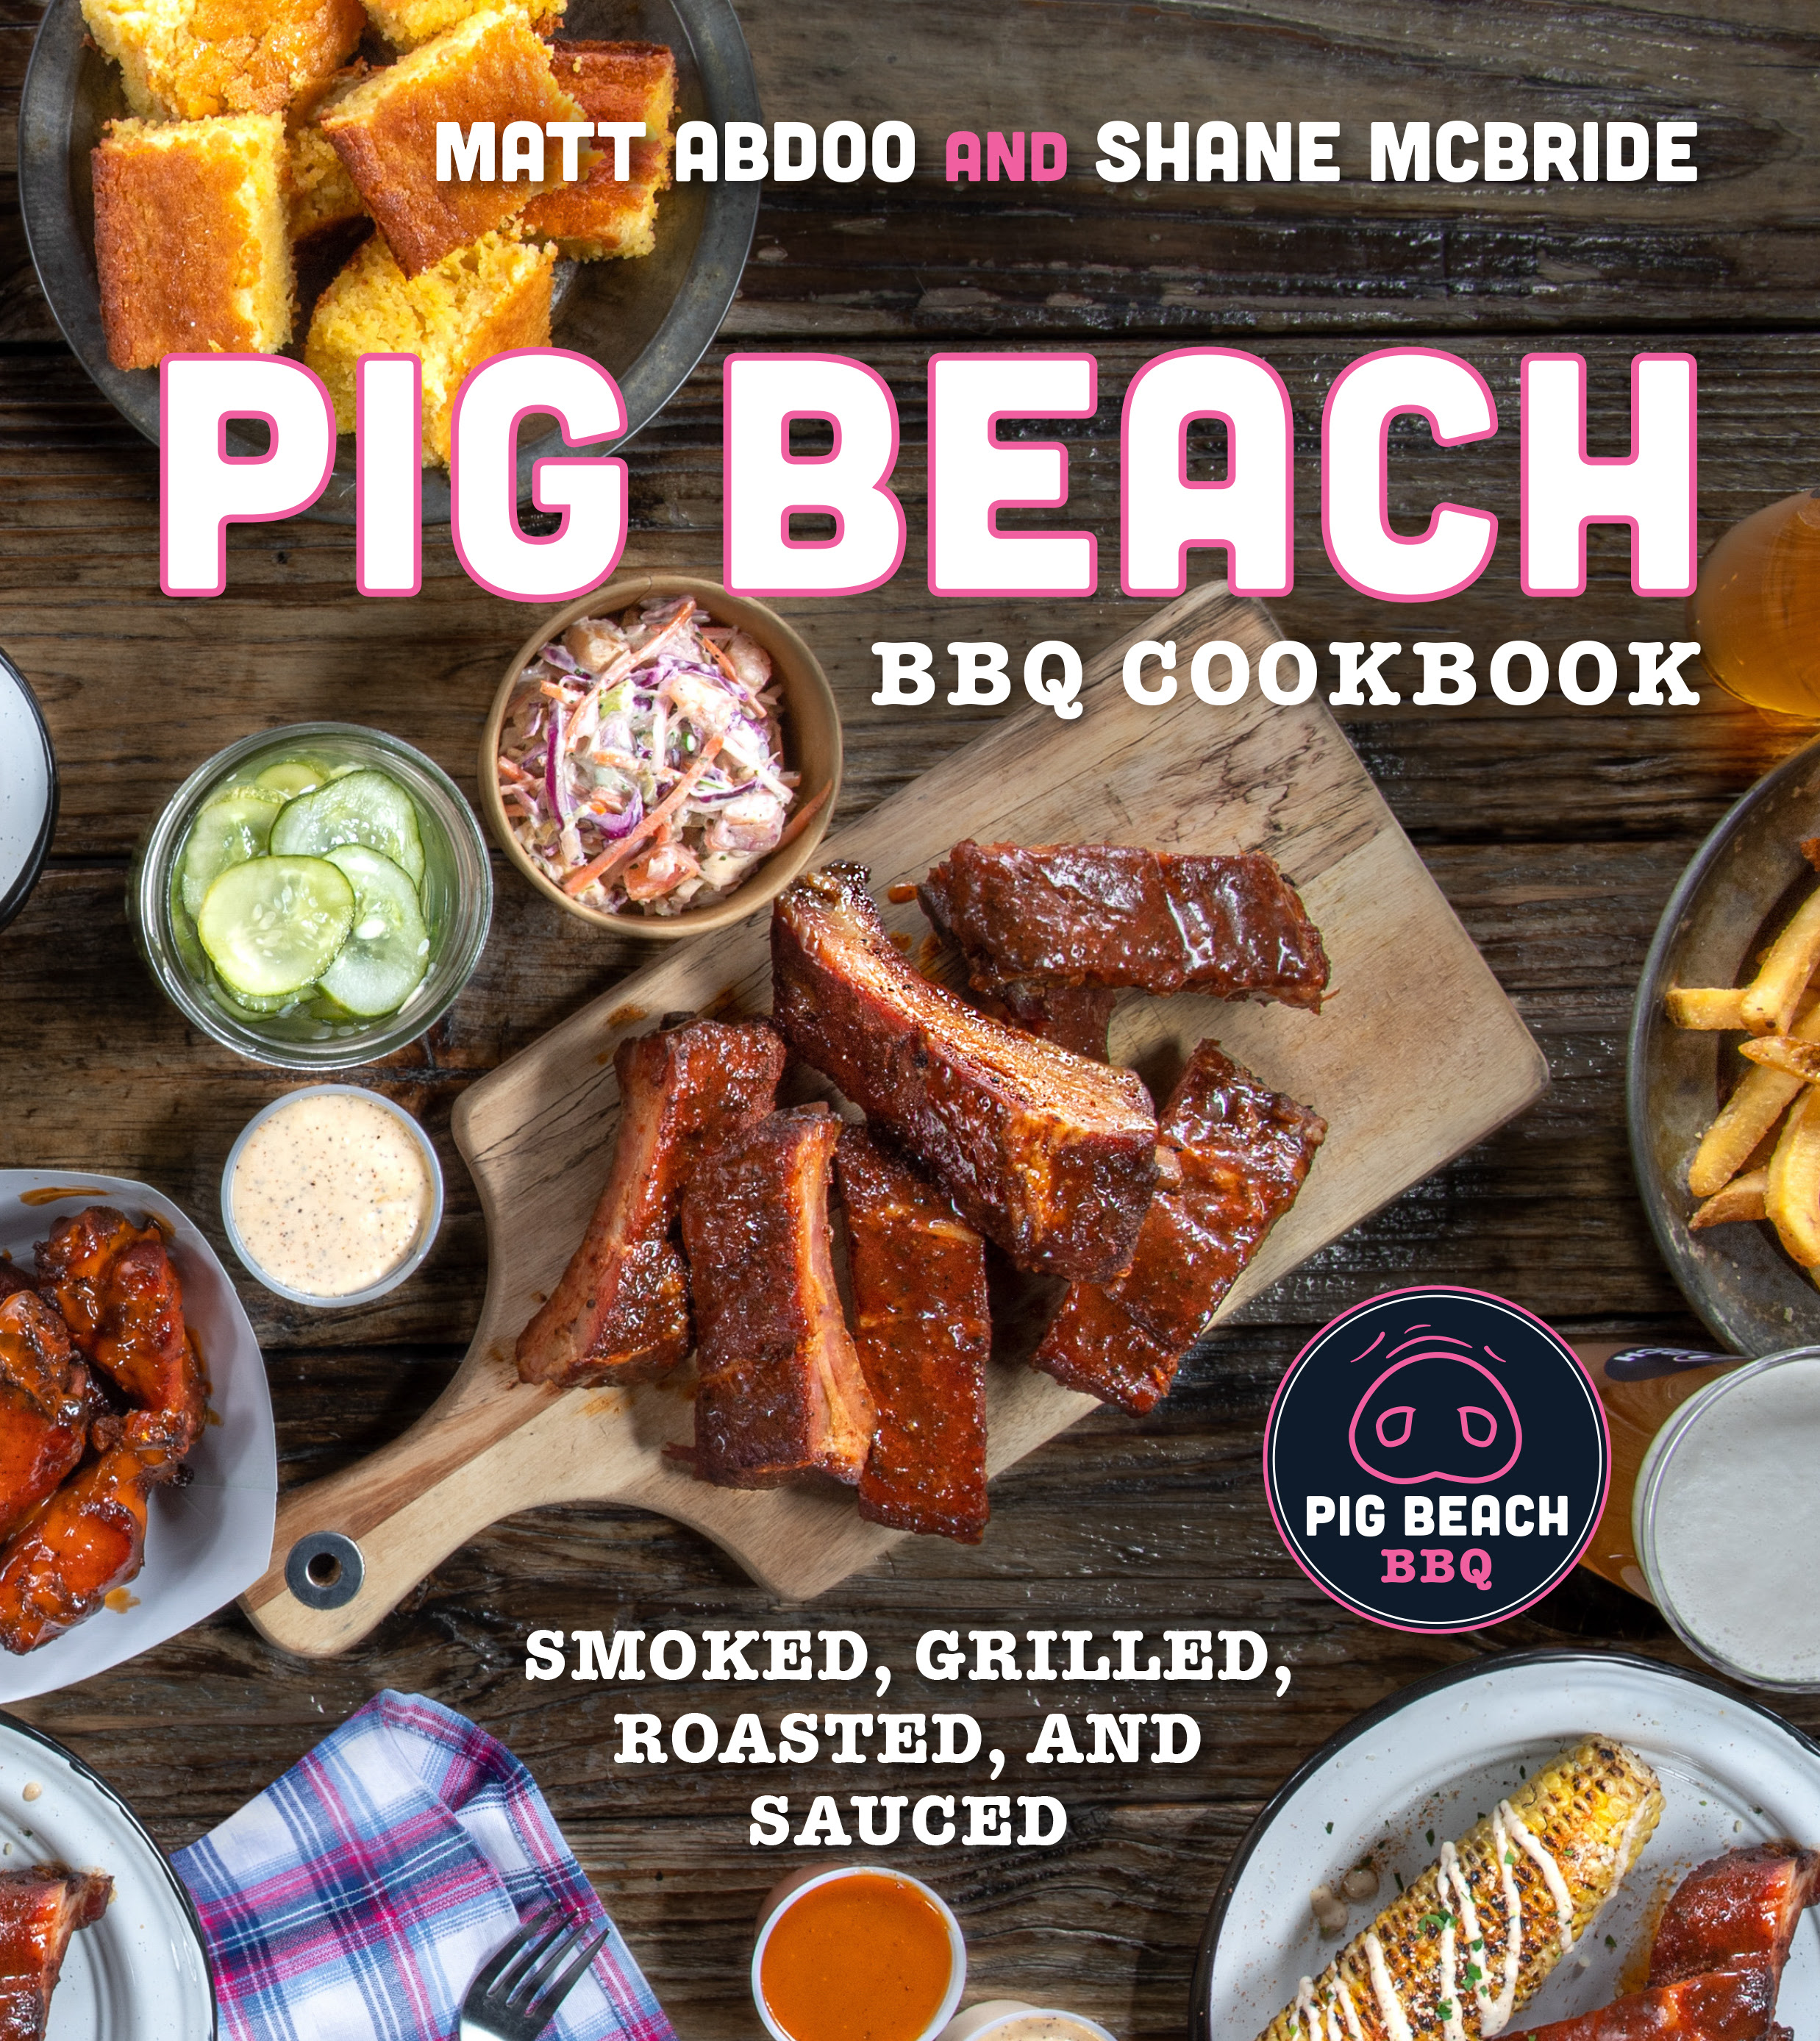 pdf download Pig Beach BBQ Cookbook: Smoked, Grilled, Roasted, and Sauced